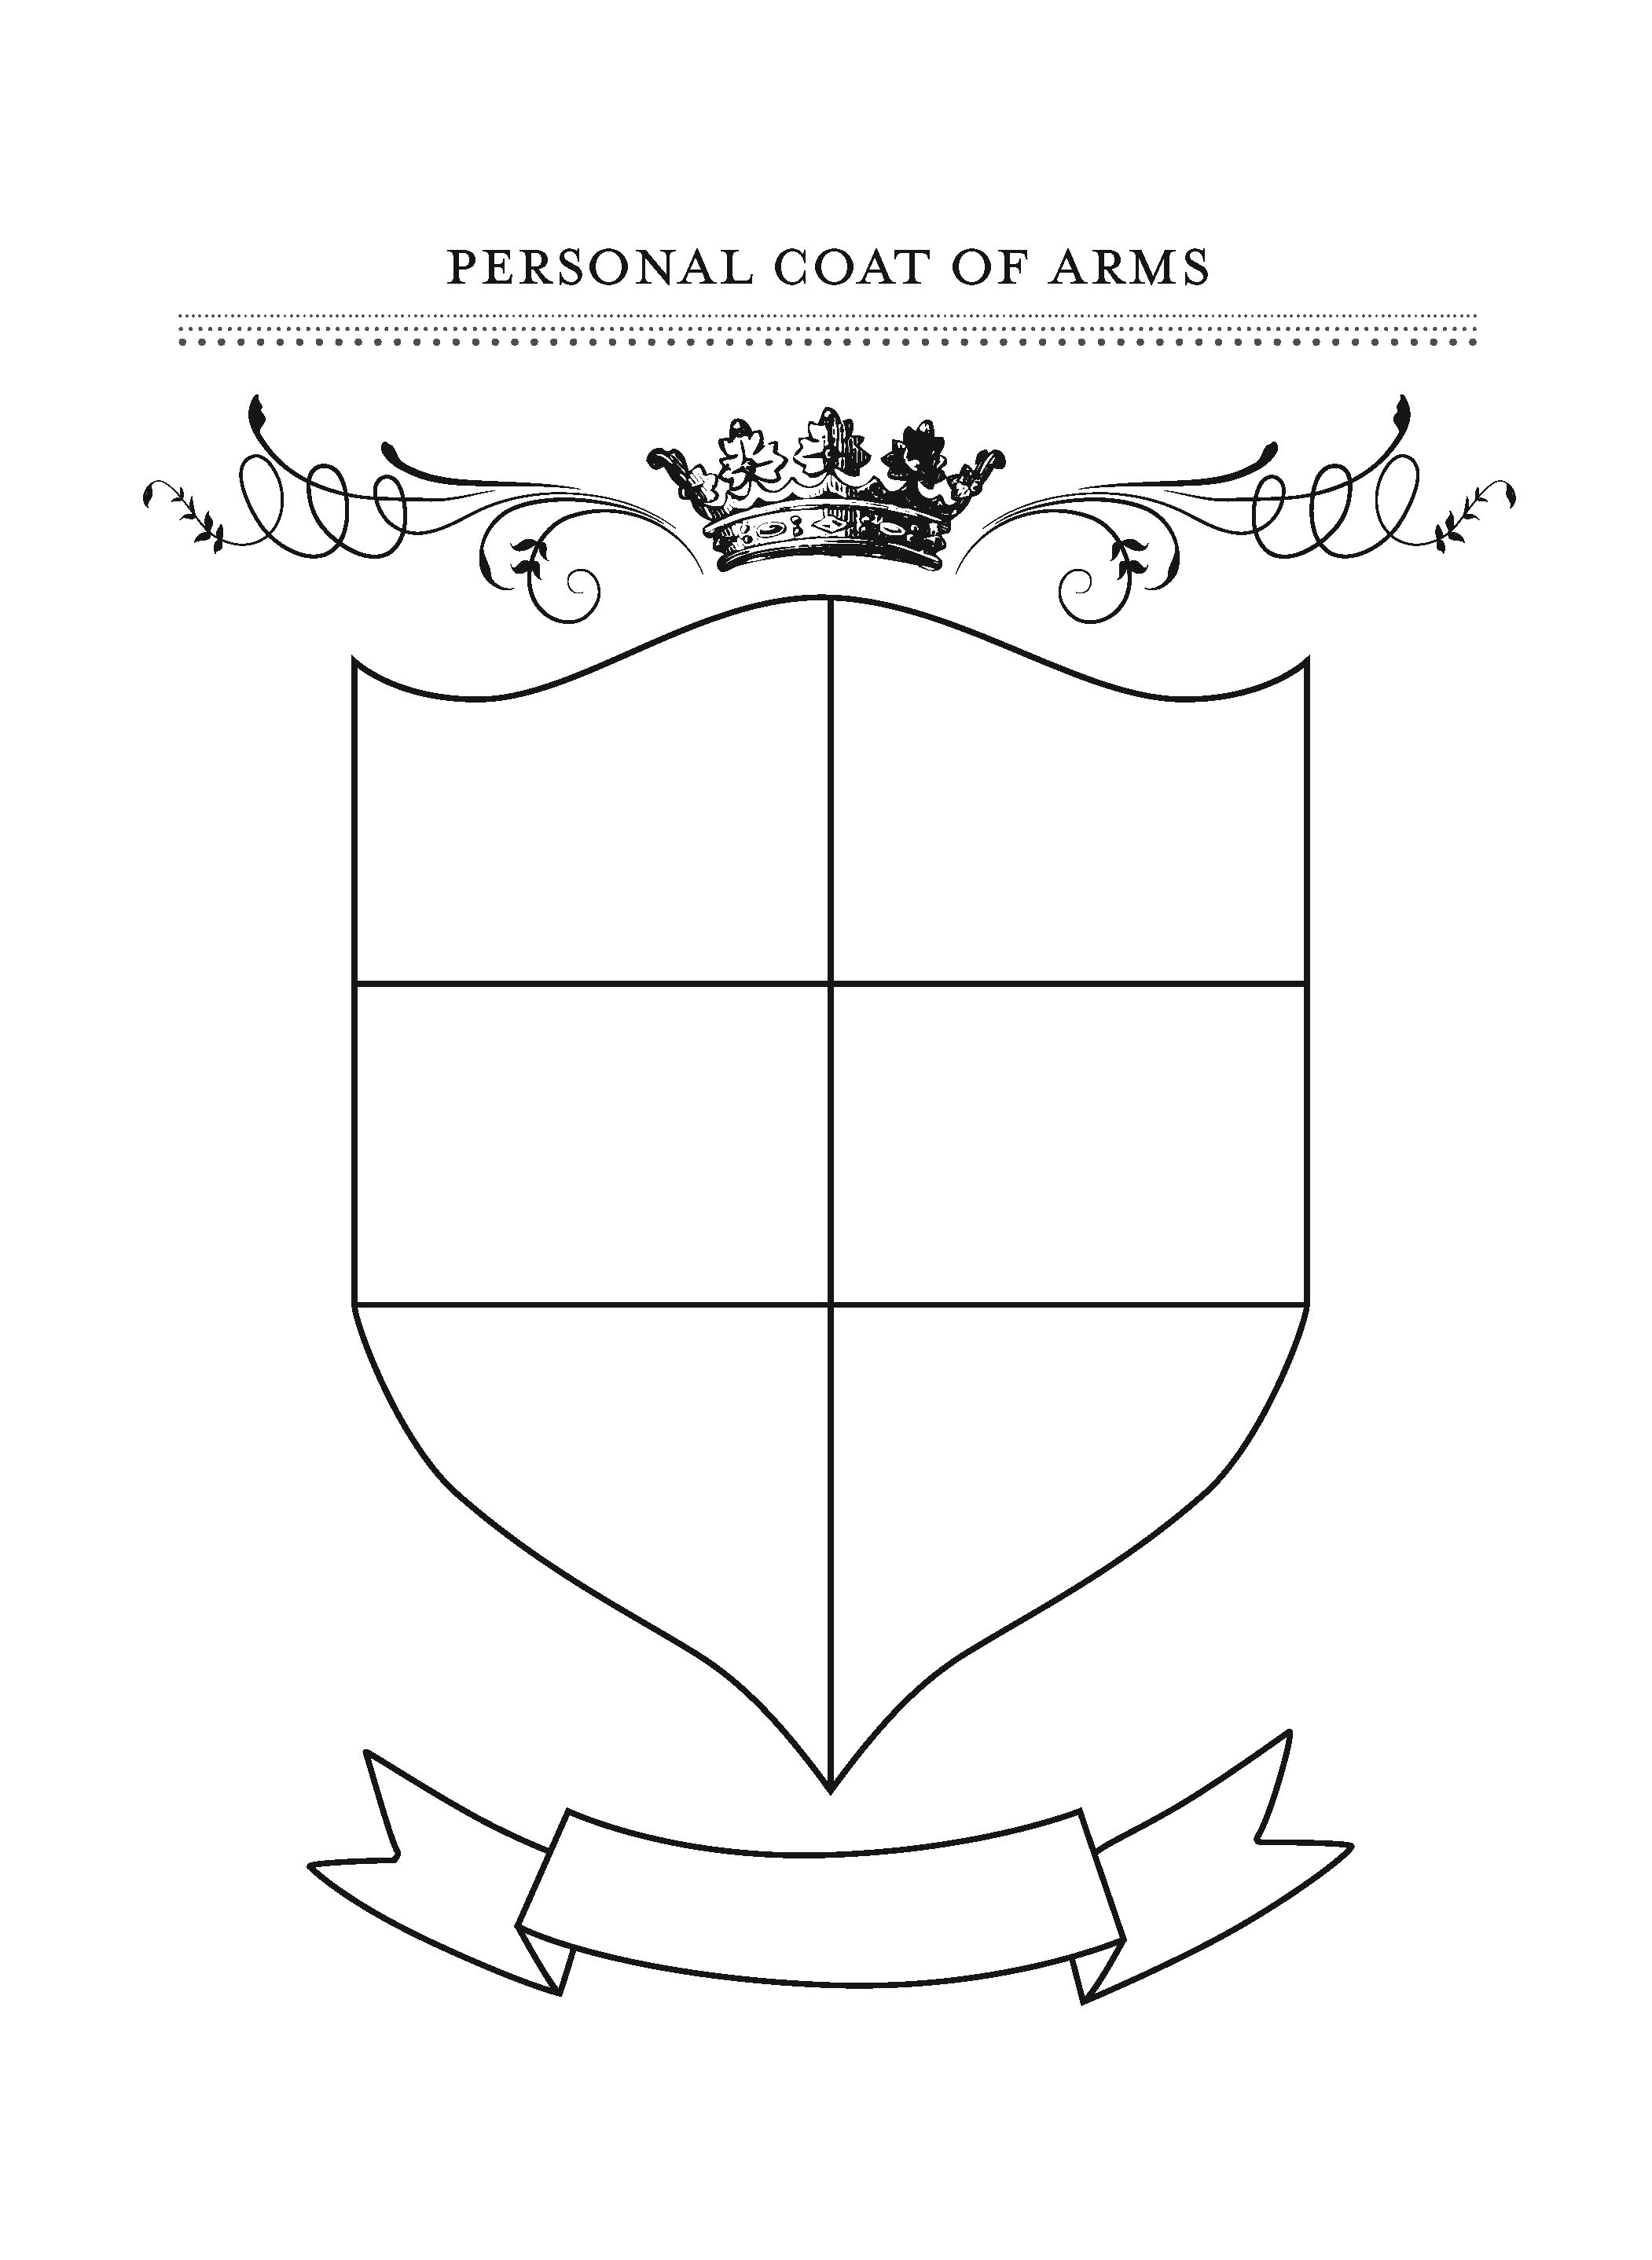 Recreation Therapy Ideas Personal Coat of Arms